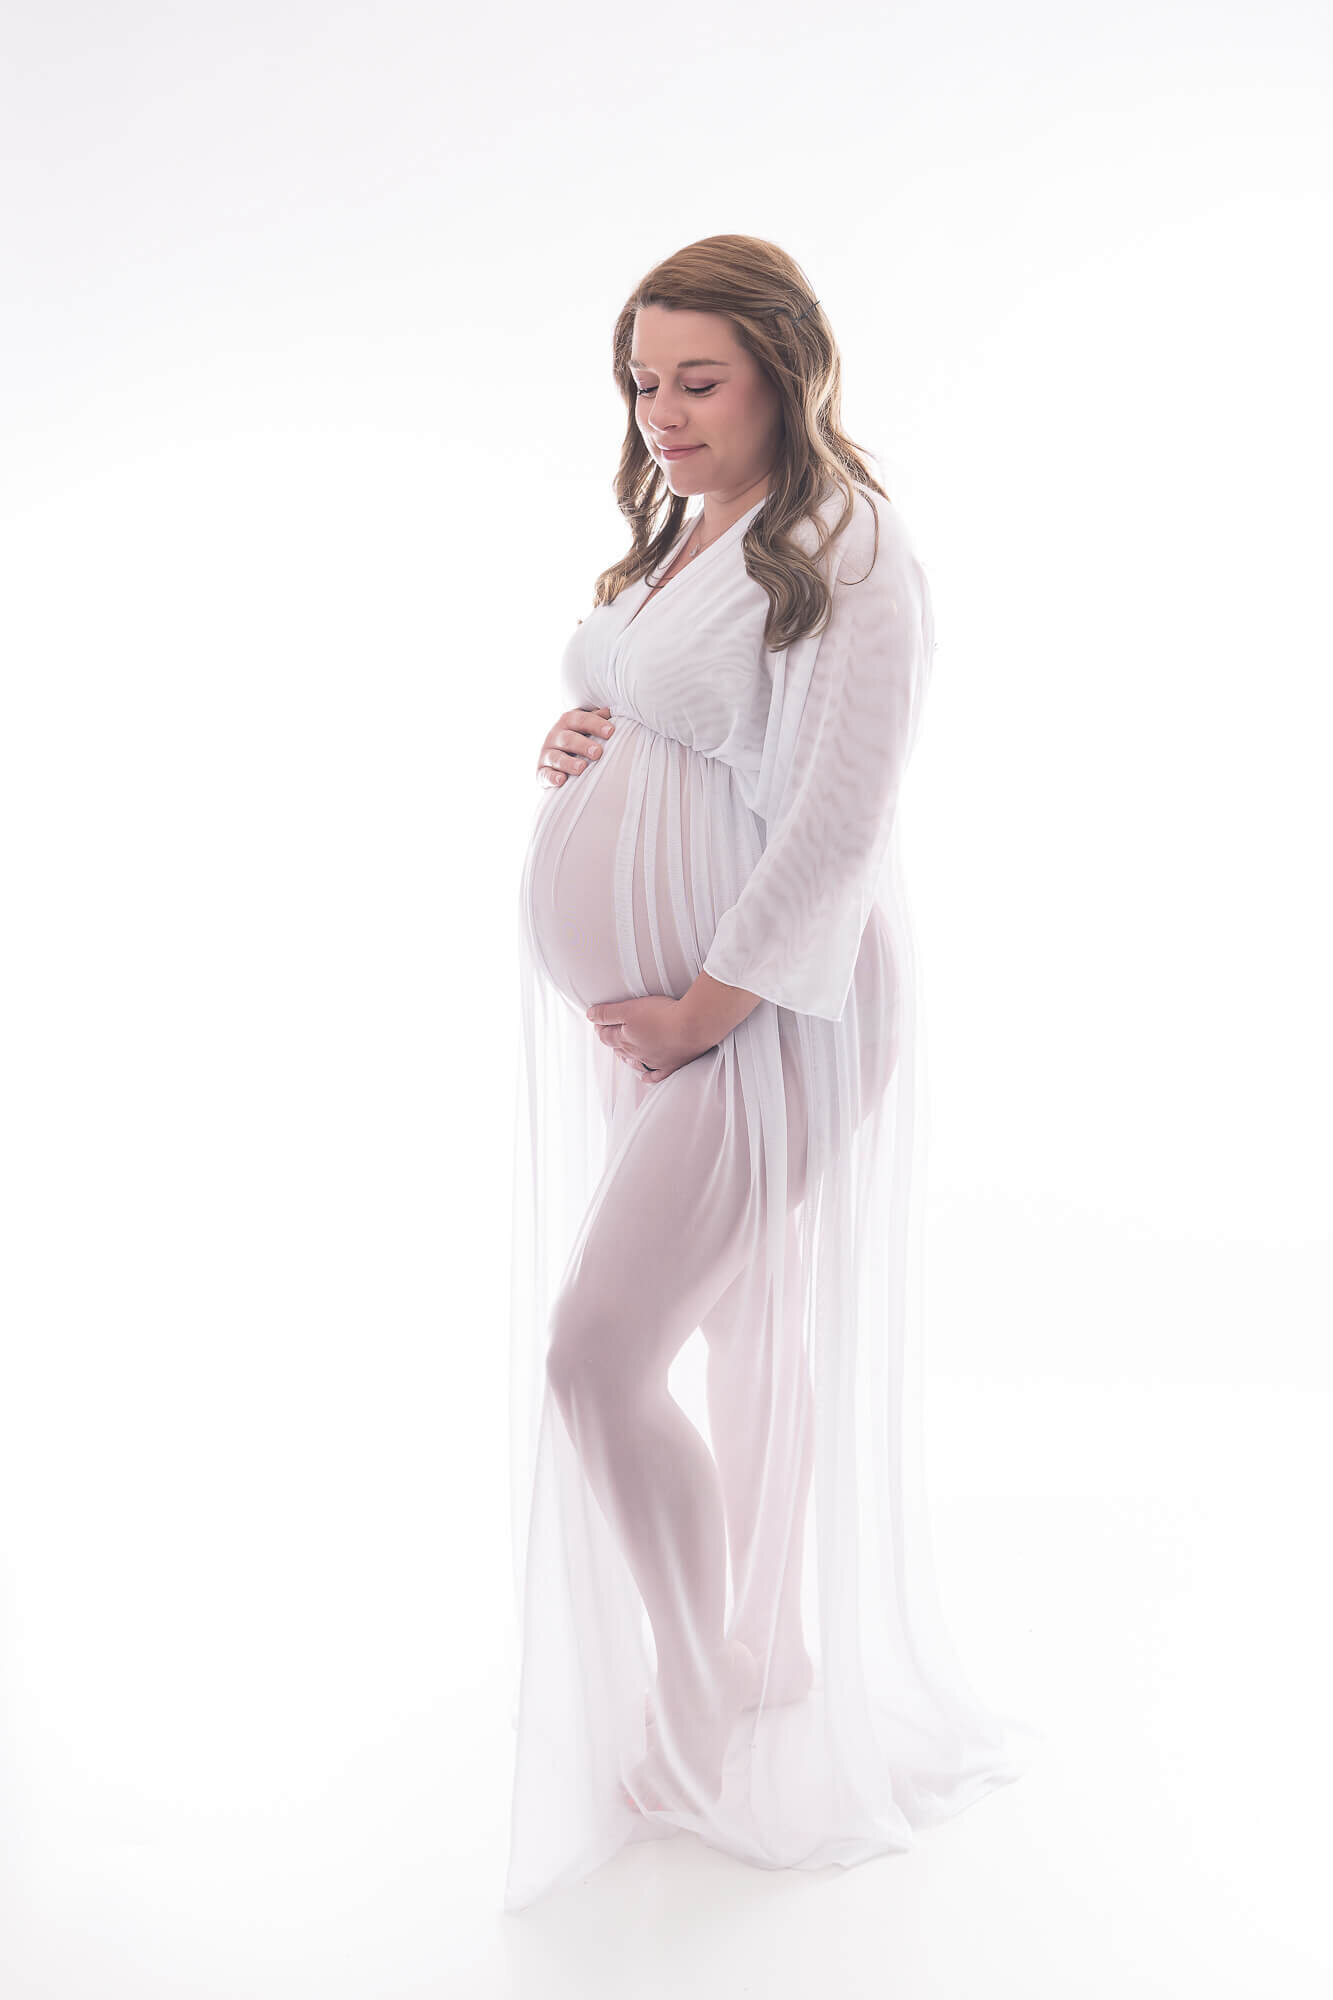 studio maternity session, mom in white maternity gown